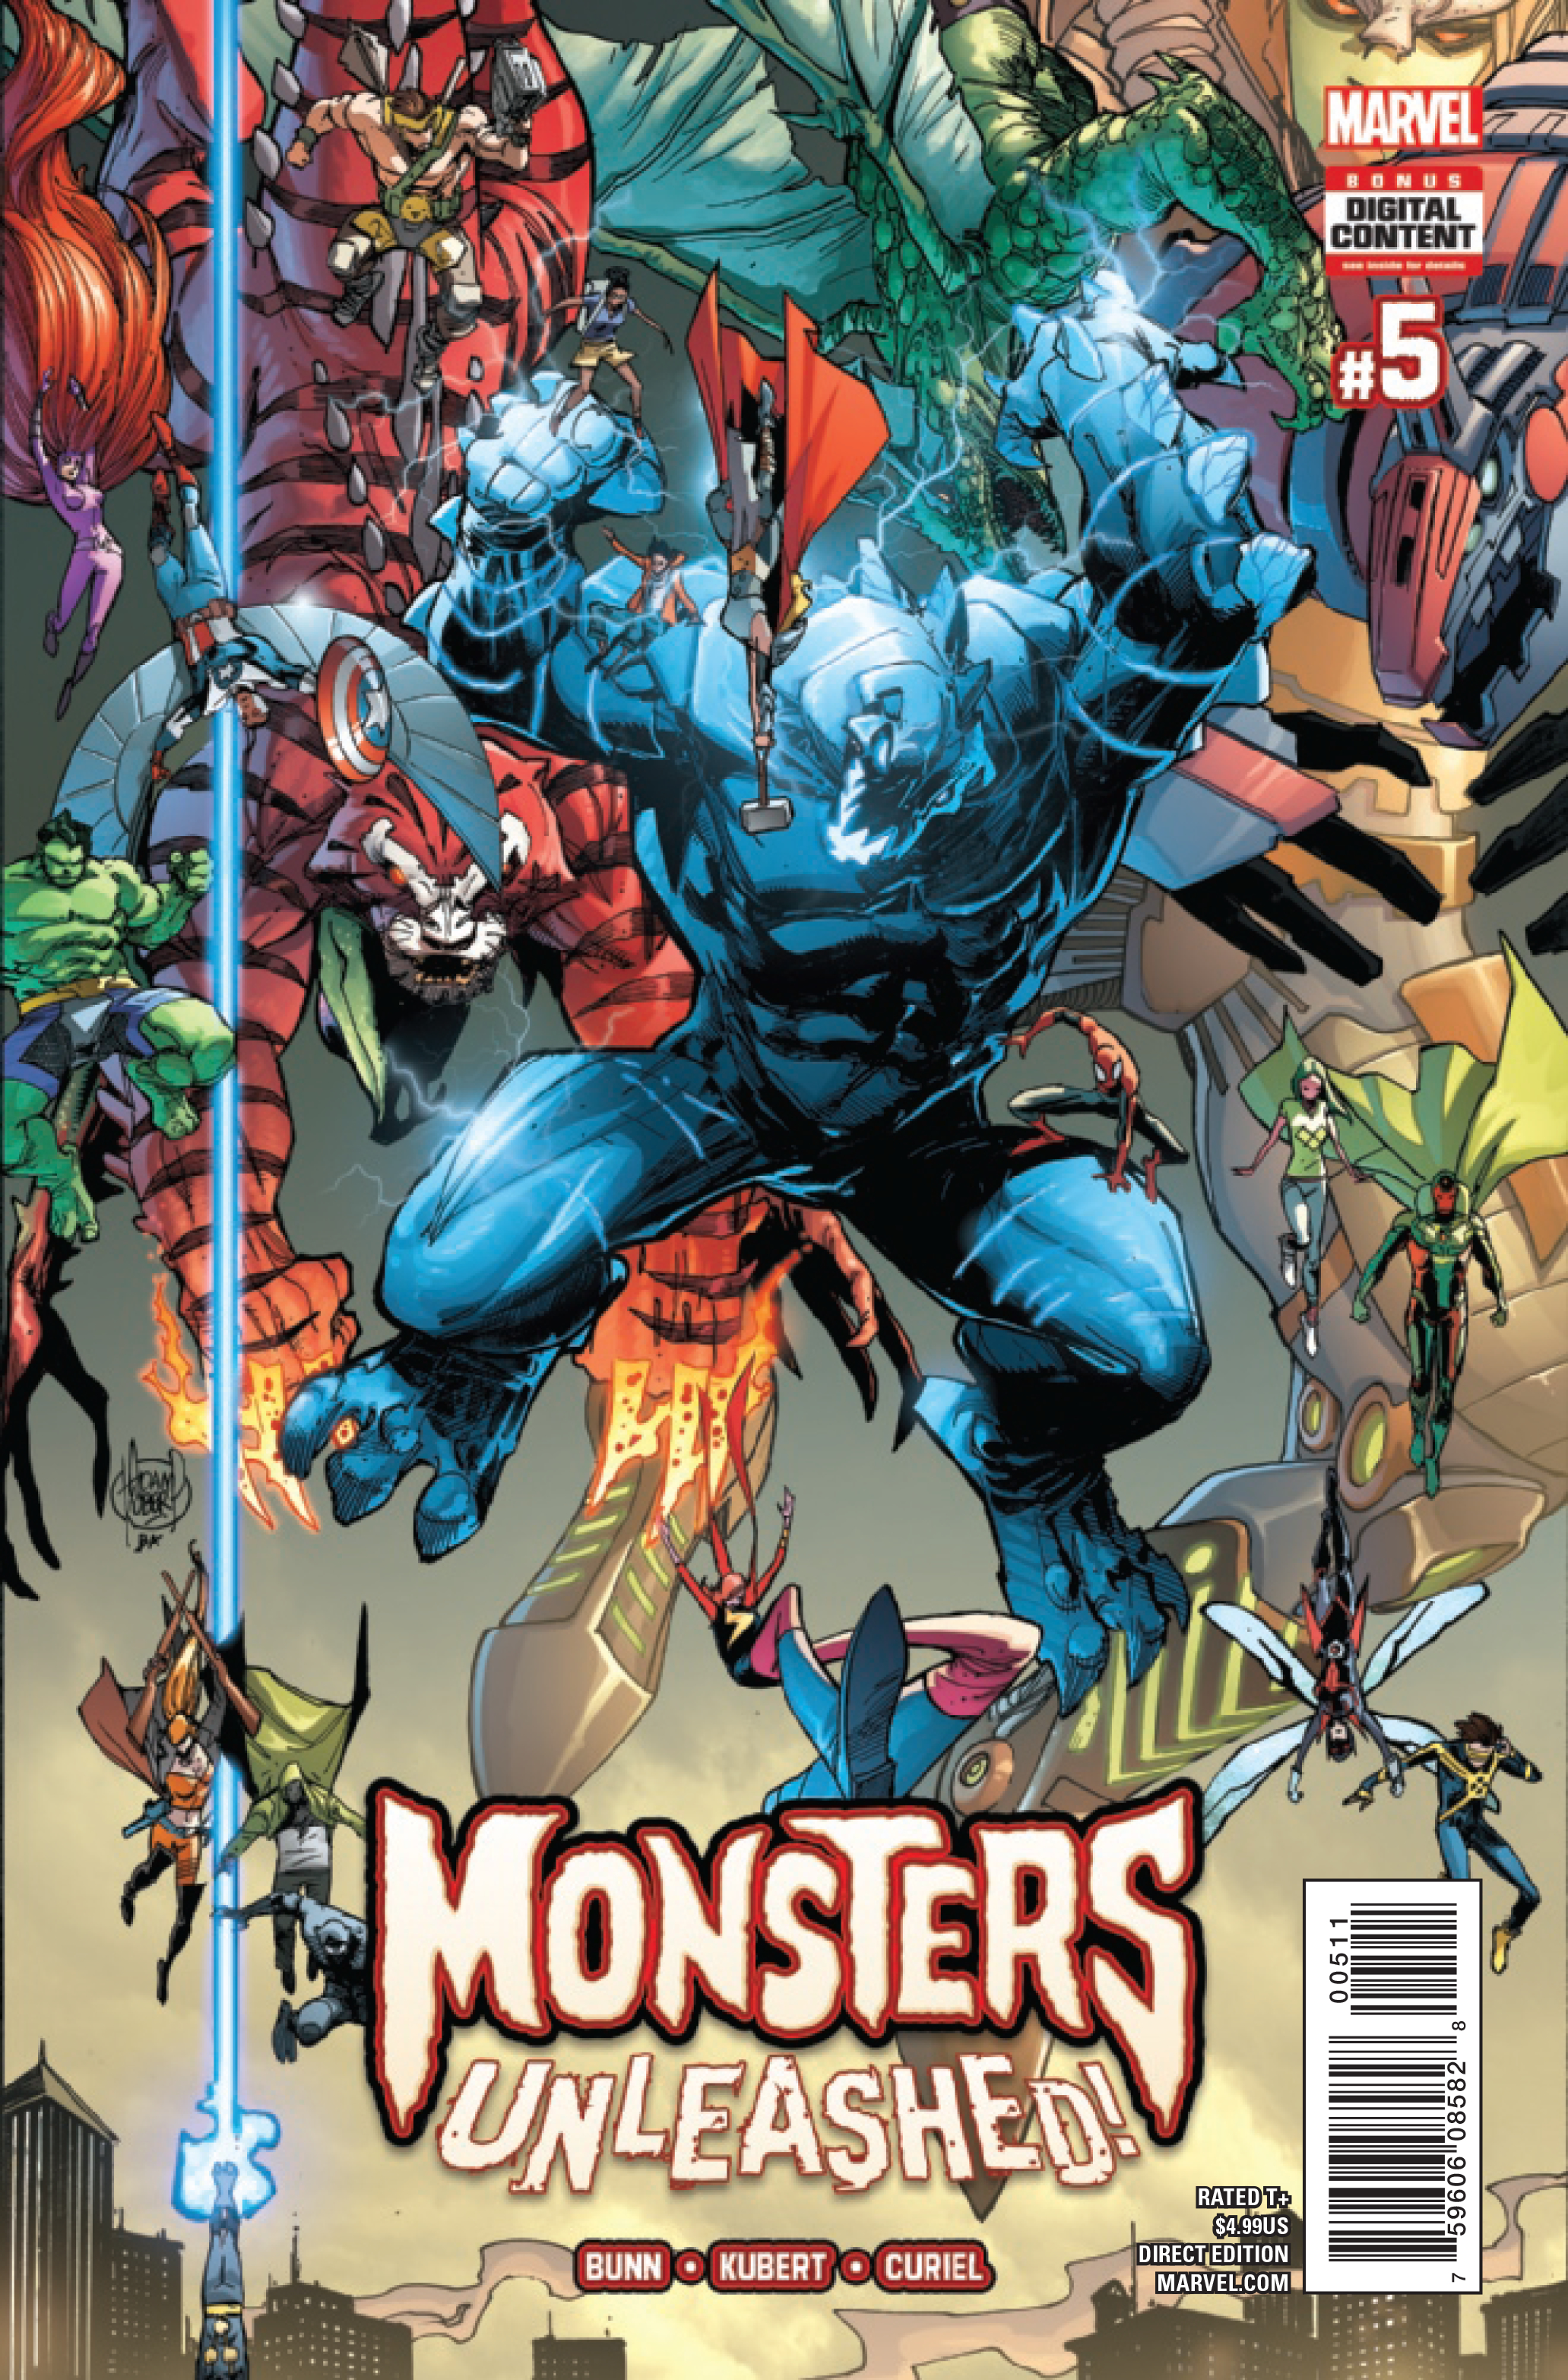 MONSTERS UNLEASHED #5 (OF 5)